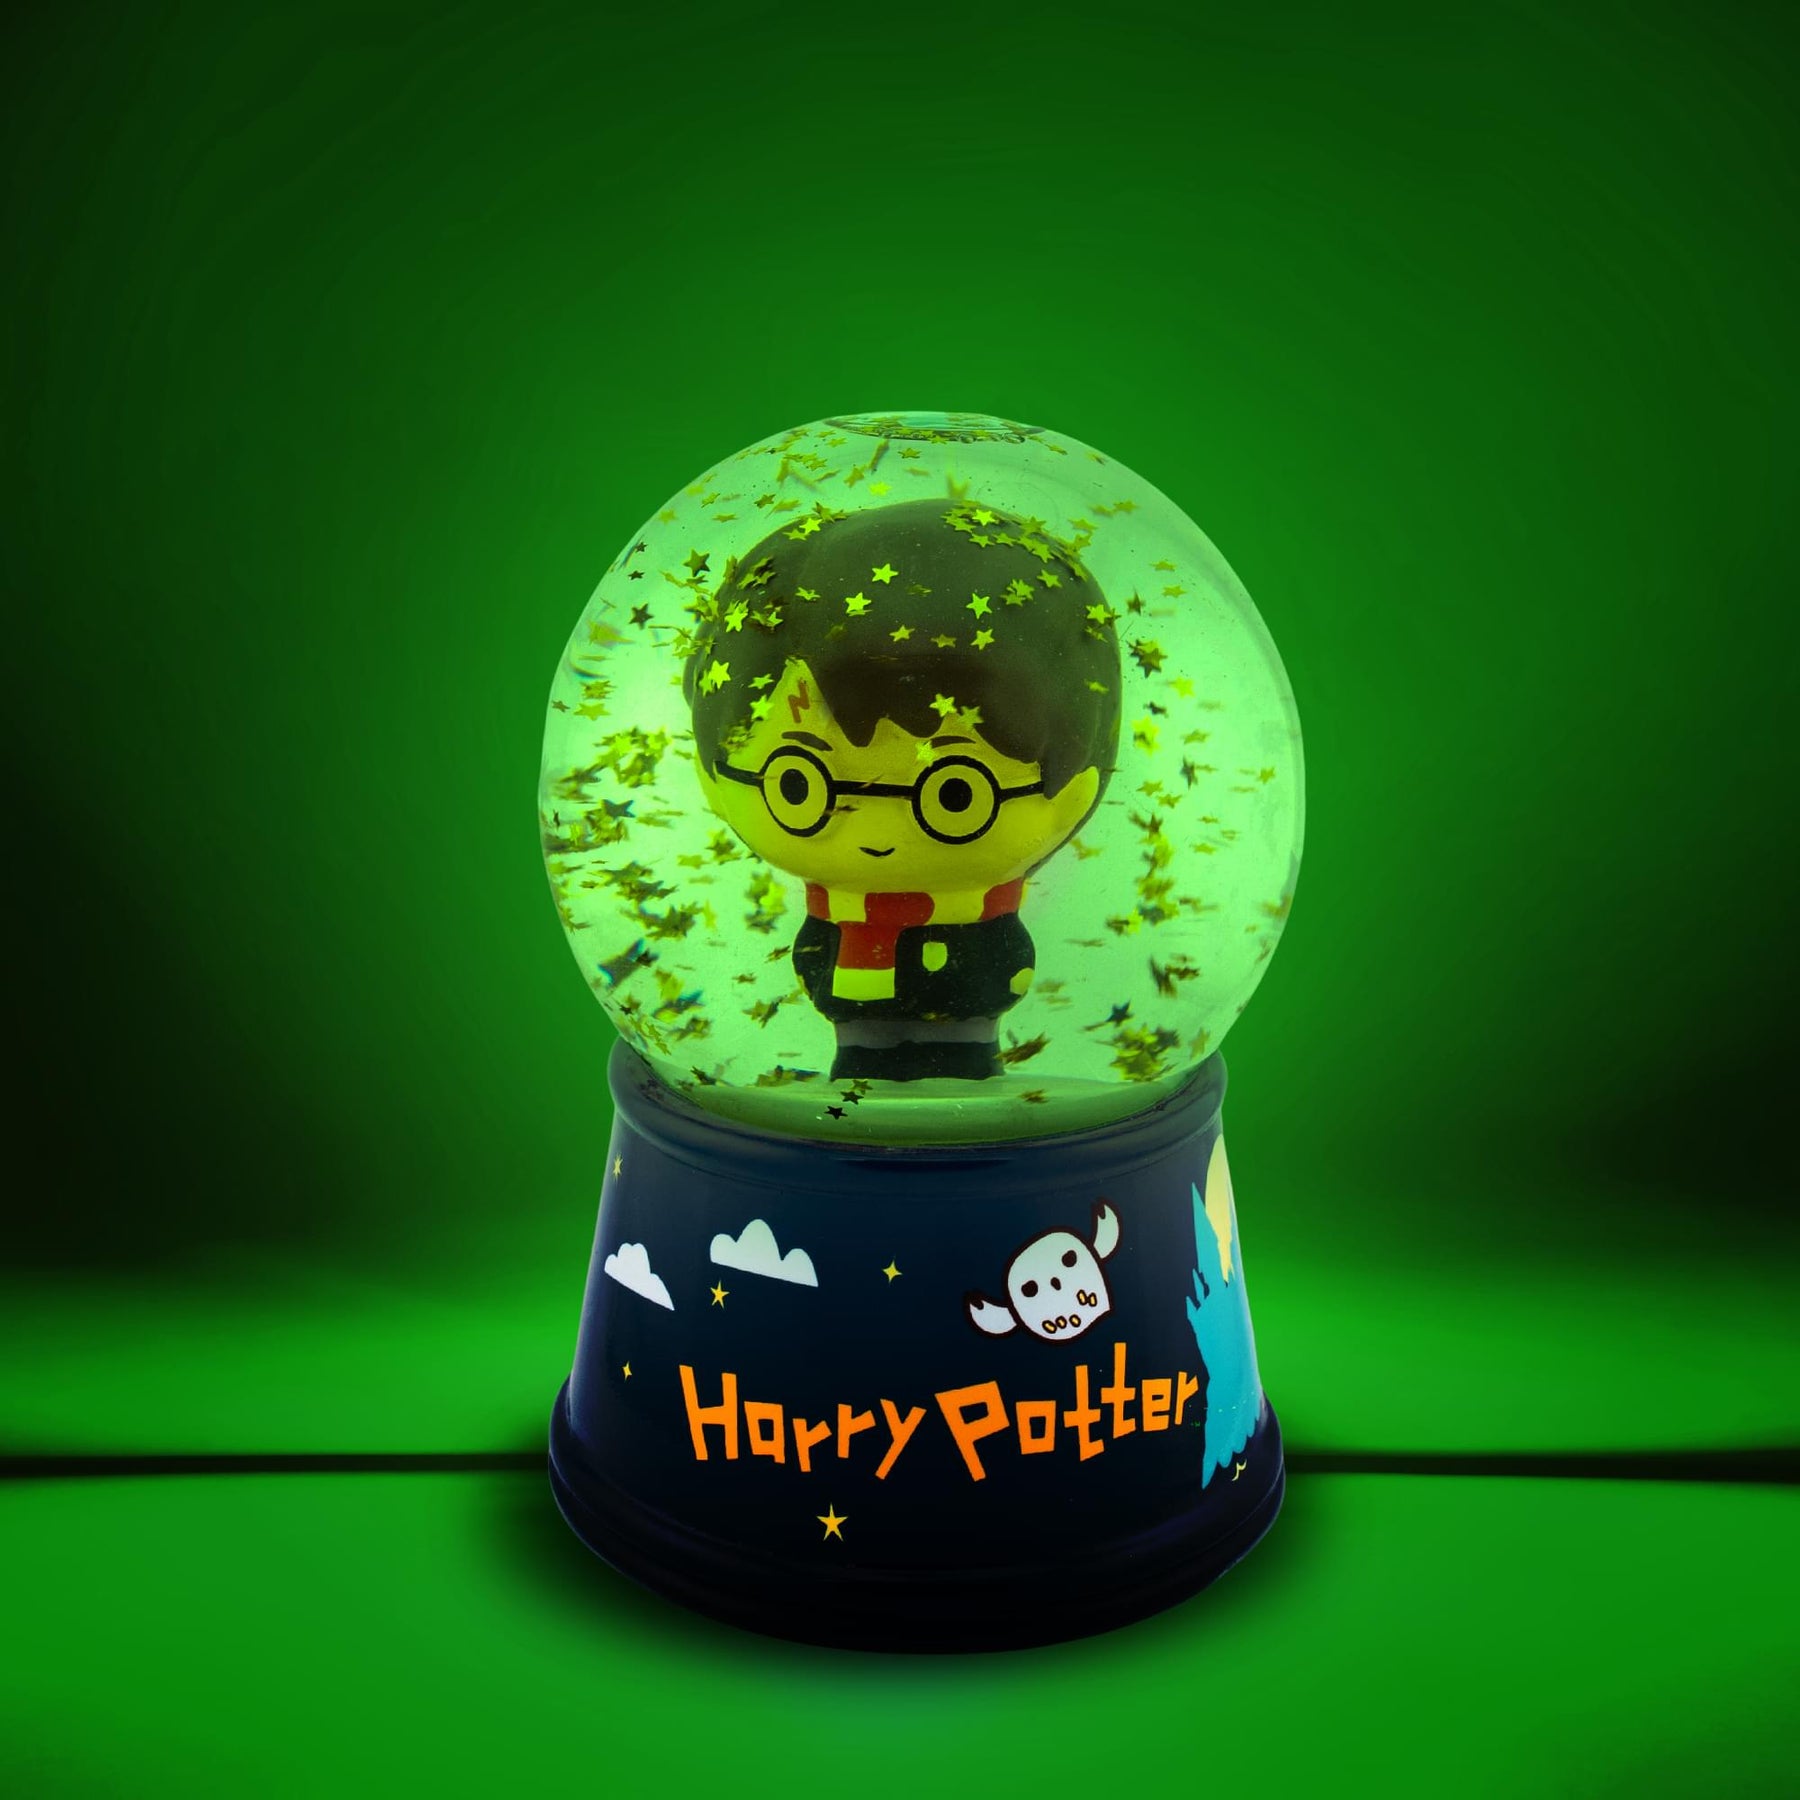 Harry Potter Chibi Characters 6-Inch Light-Up Snow Globe